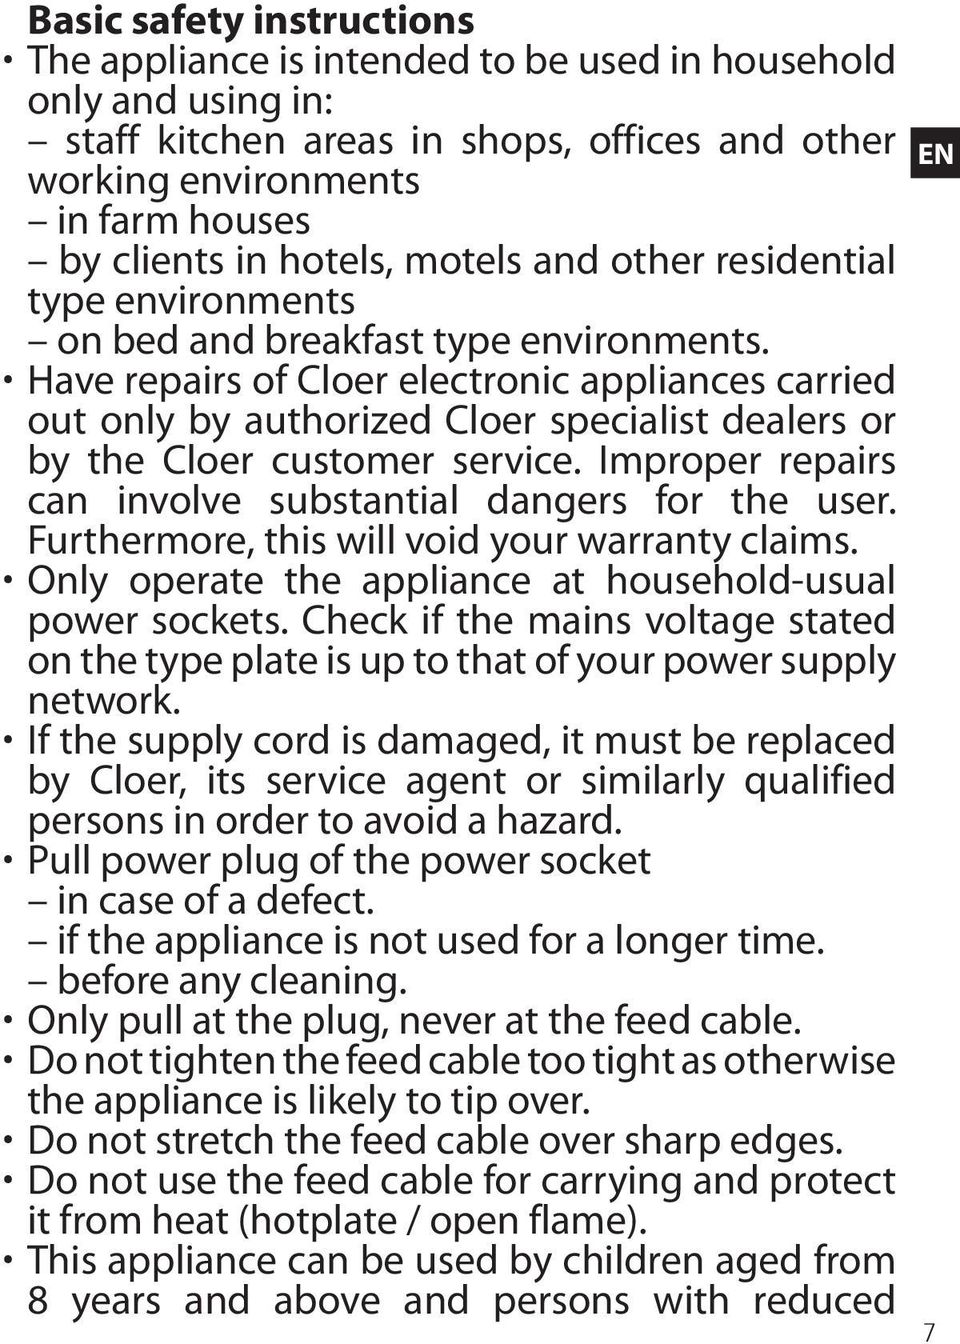 Have repairs of Cloer electronic appliances carried out only by authorized Cloer specialist dealers or by the Cloer customer service. Improper repairs can involve substantial dangers for the user.